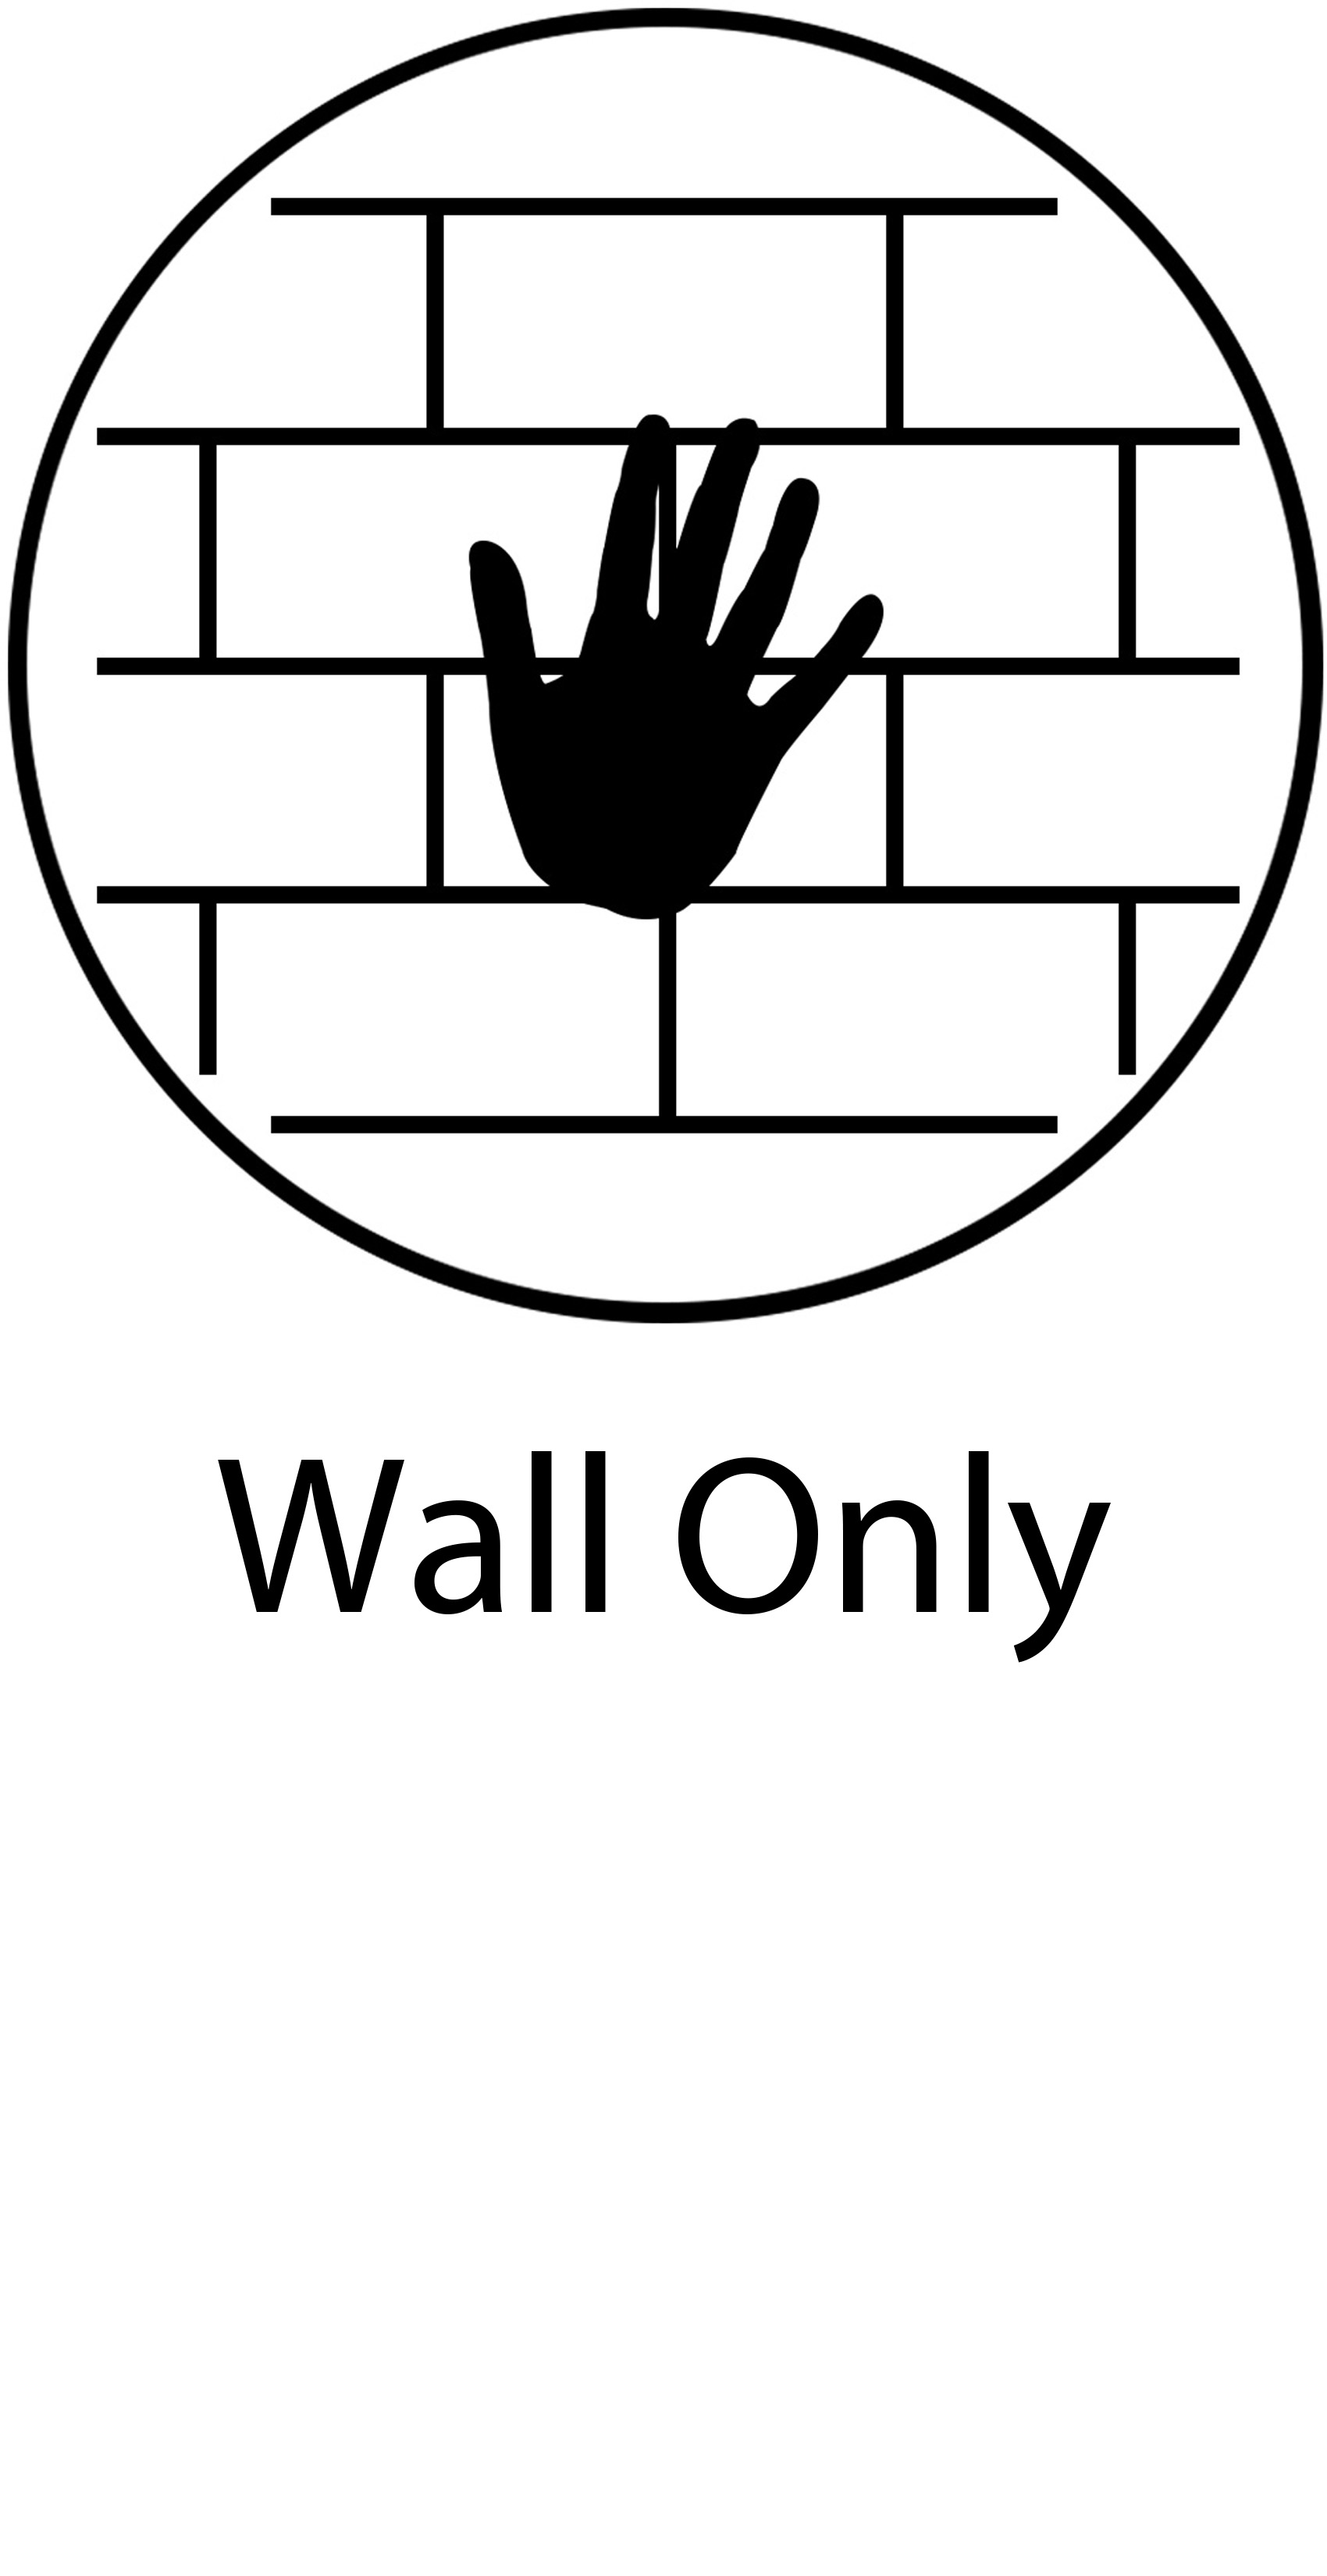 Wall only.jpg